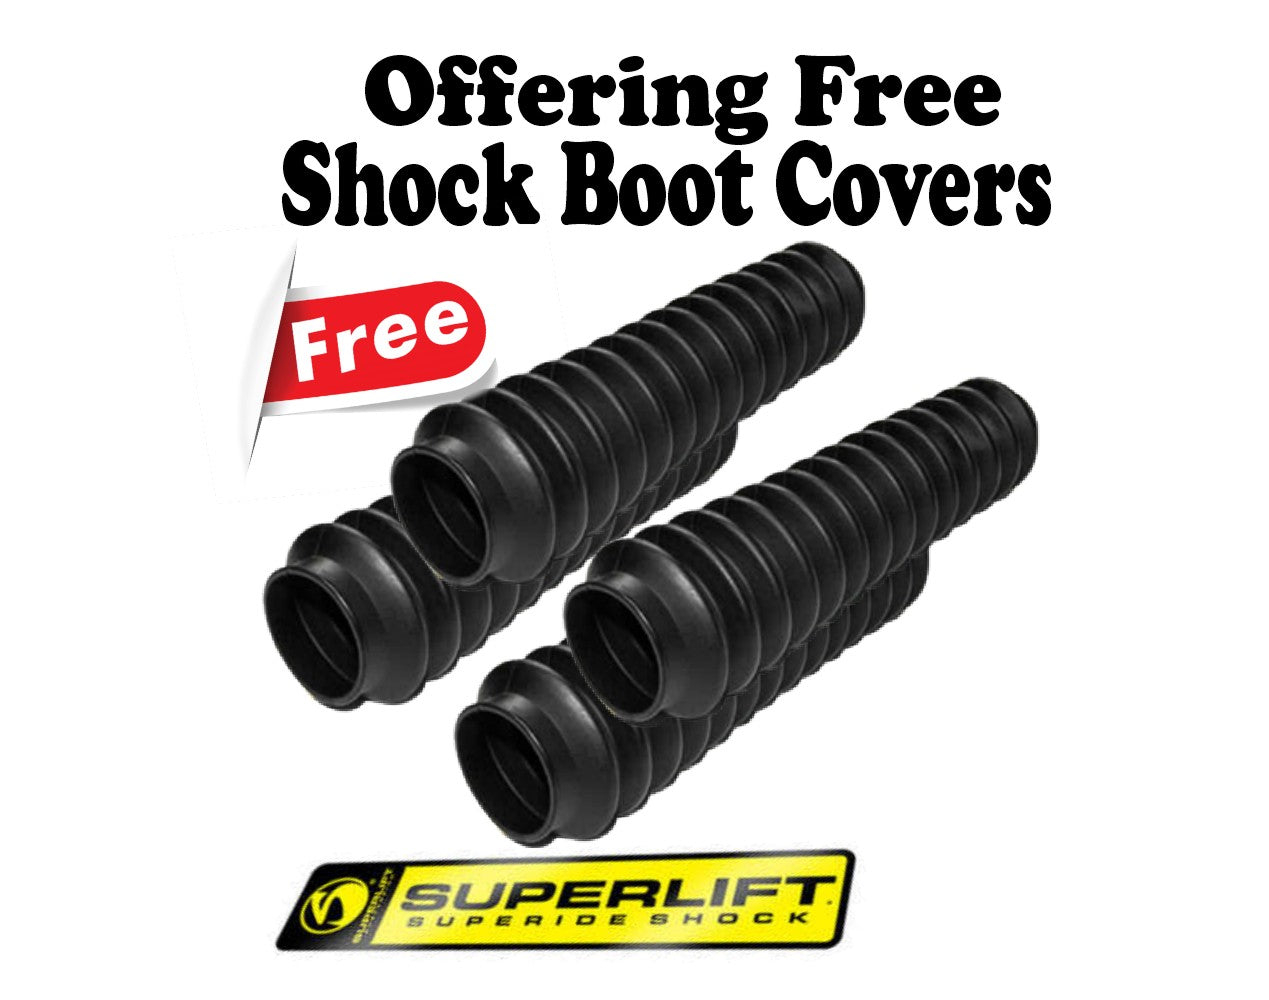 Superlift 2005-2007 Ford F-250 F-350 Super Duty Diesel 4 inch Suspension Lift Kit With Fox 2.0 Shocks With 4 Link Conversion 4WD K230FX